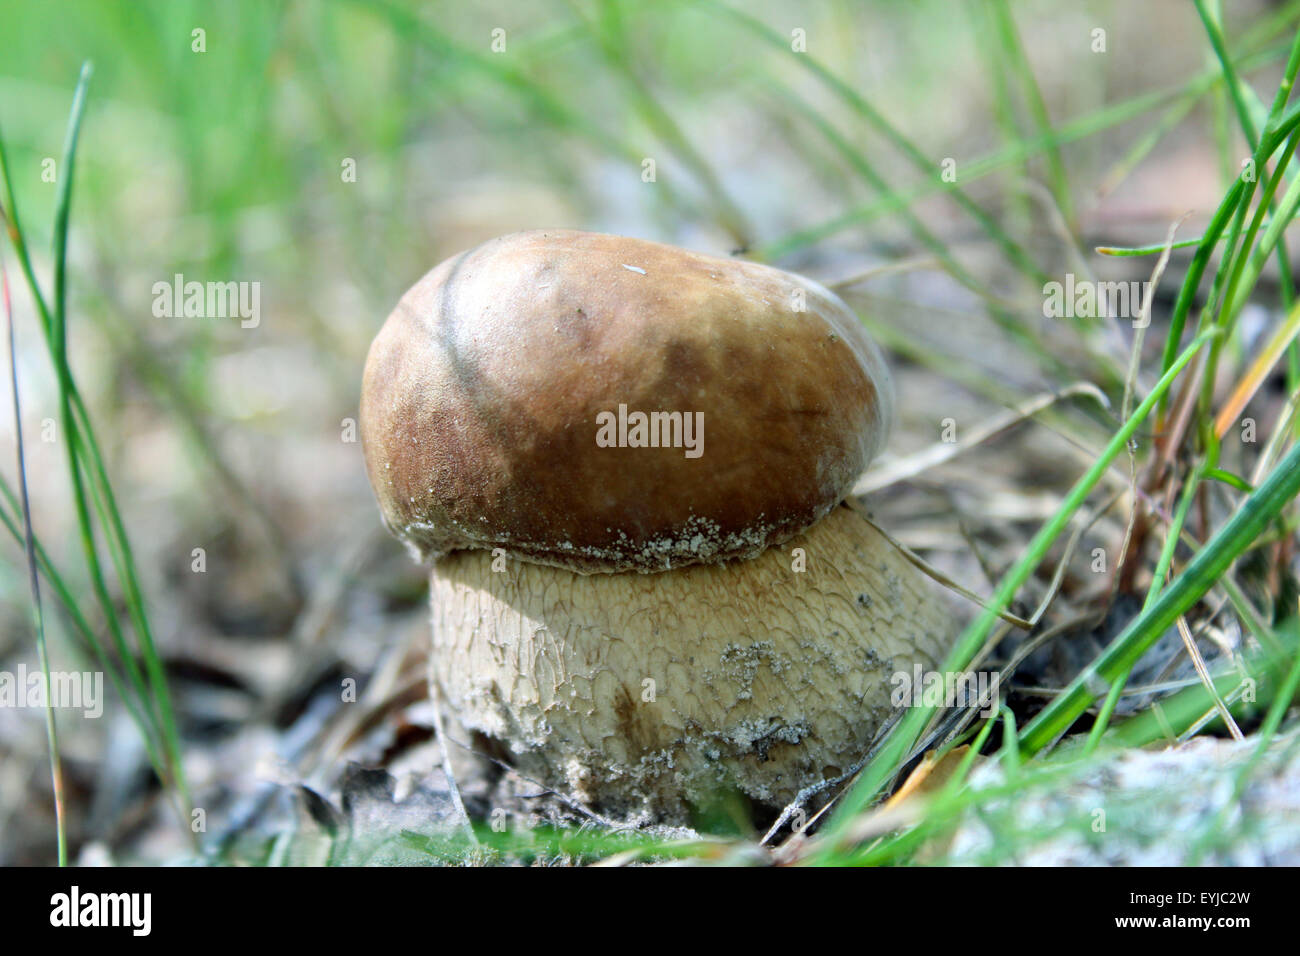 image of beautiful and small cep in the grass Stock Photo